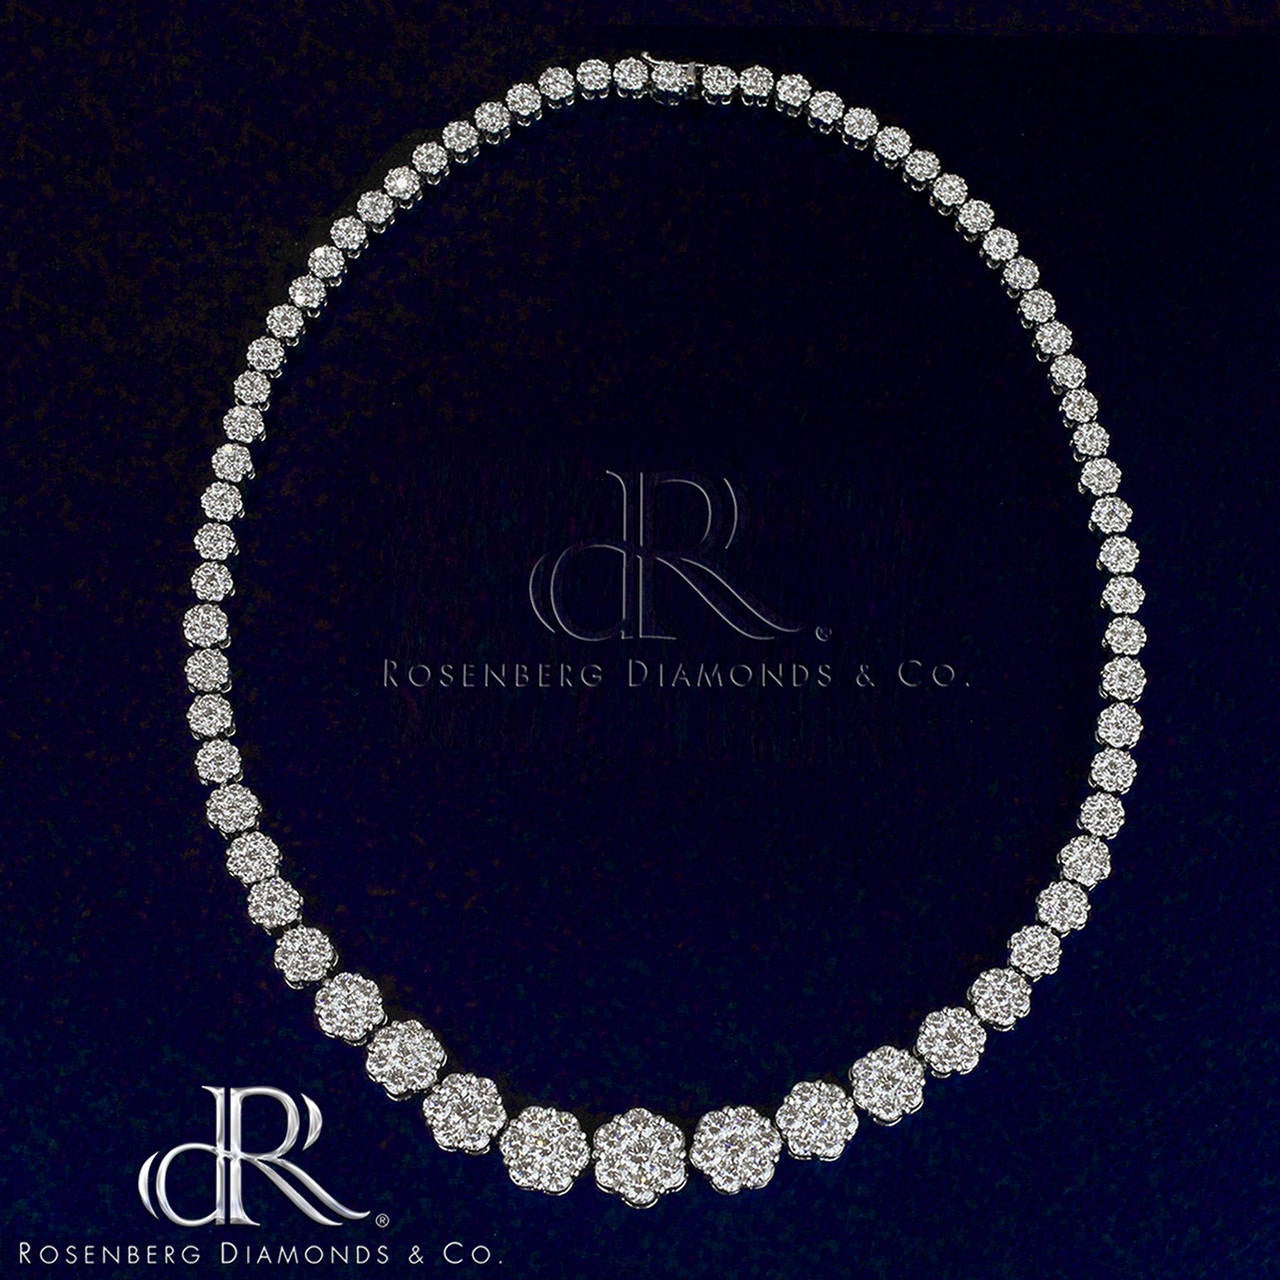 Handmade in 18k White Gold, this Beautiful graduated flower necklace has 30 cts total weight of collection color VS2-SI1 Brilliant Diamonds. 

Reference # 5239

David Rosenberg is President of the Diamond Bourse of the Southeastern United States